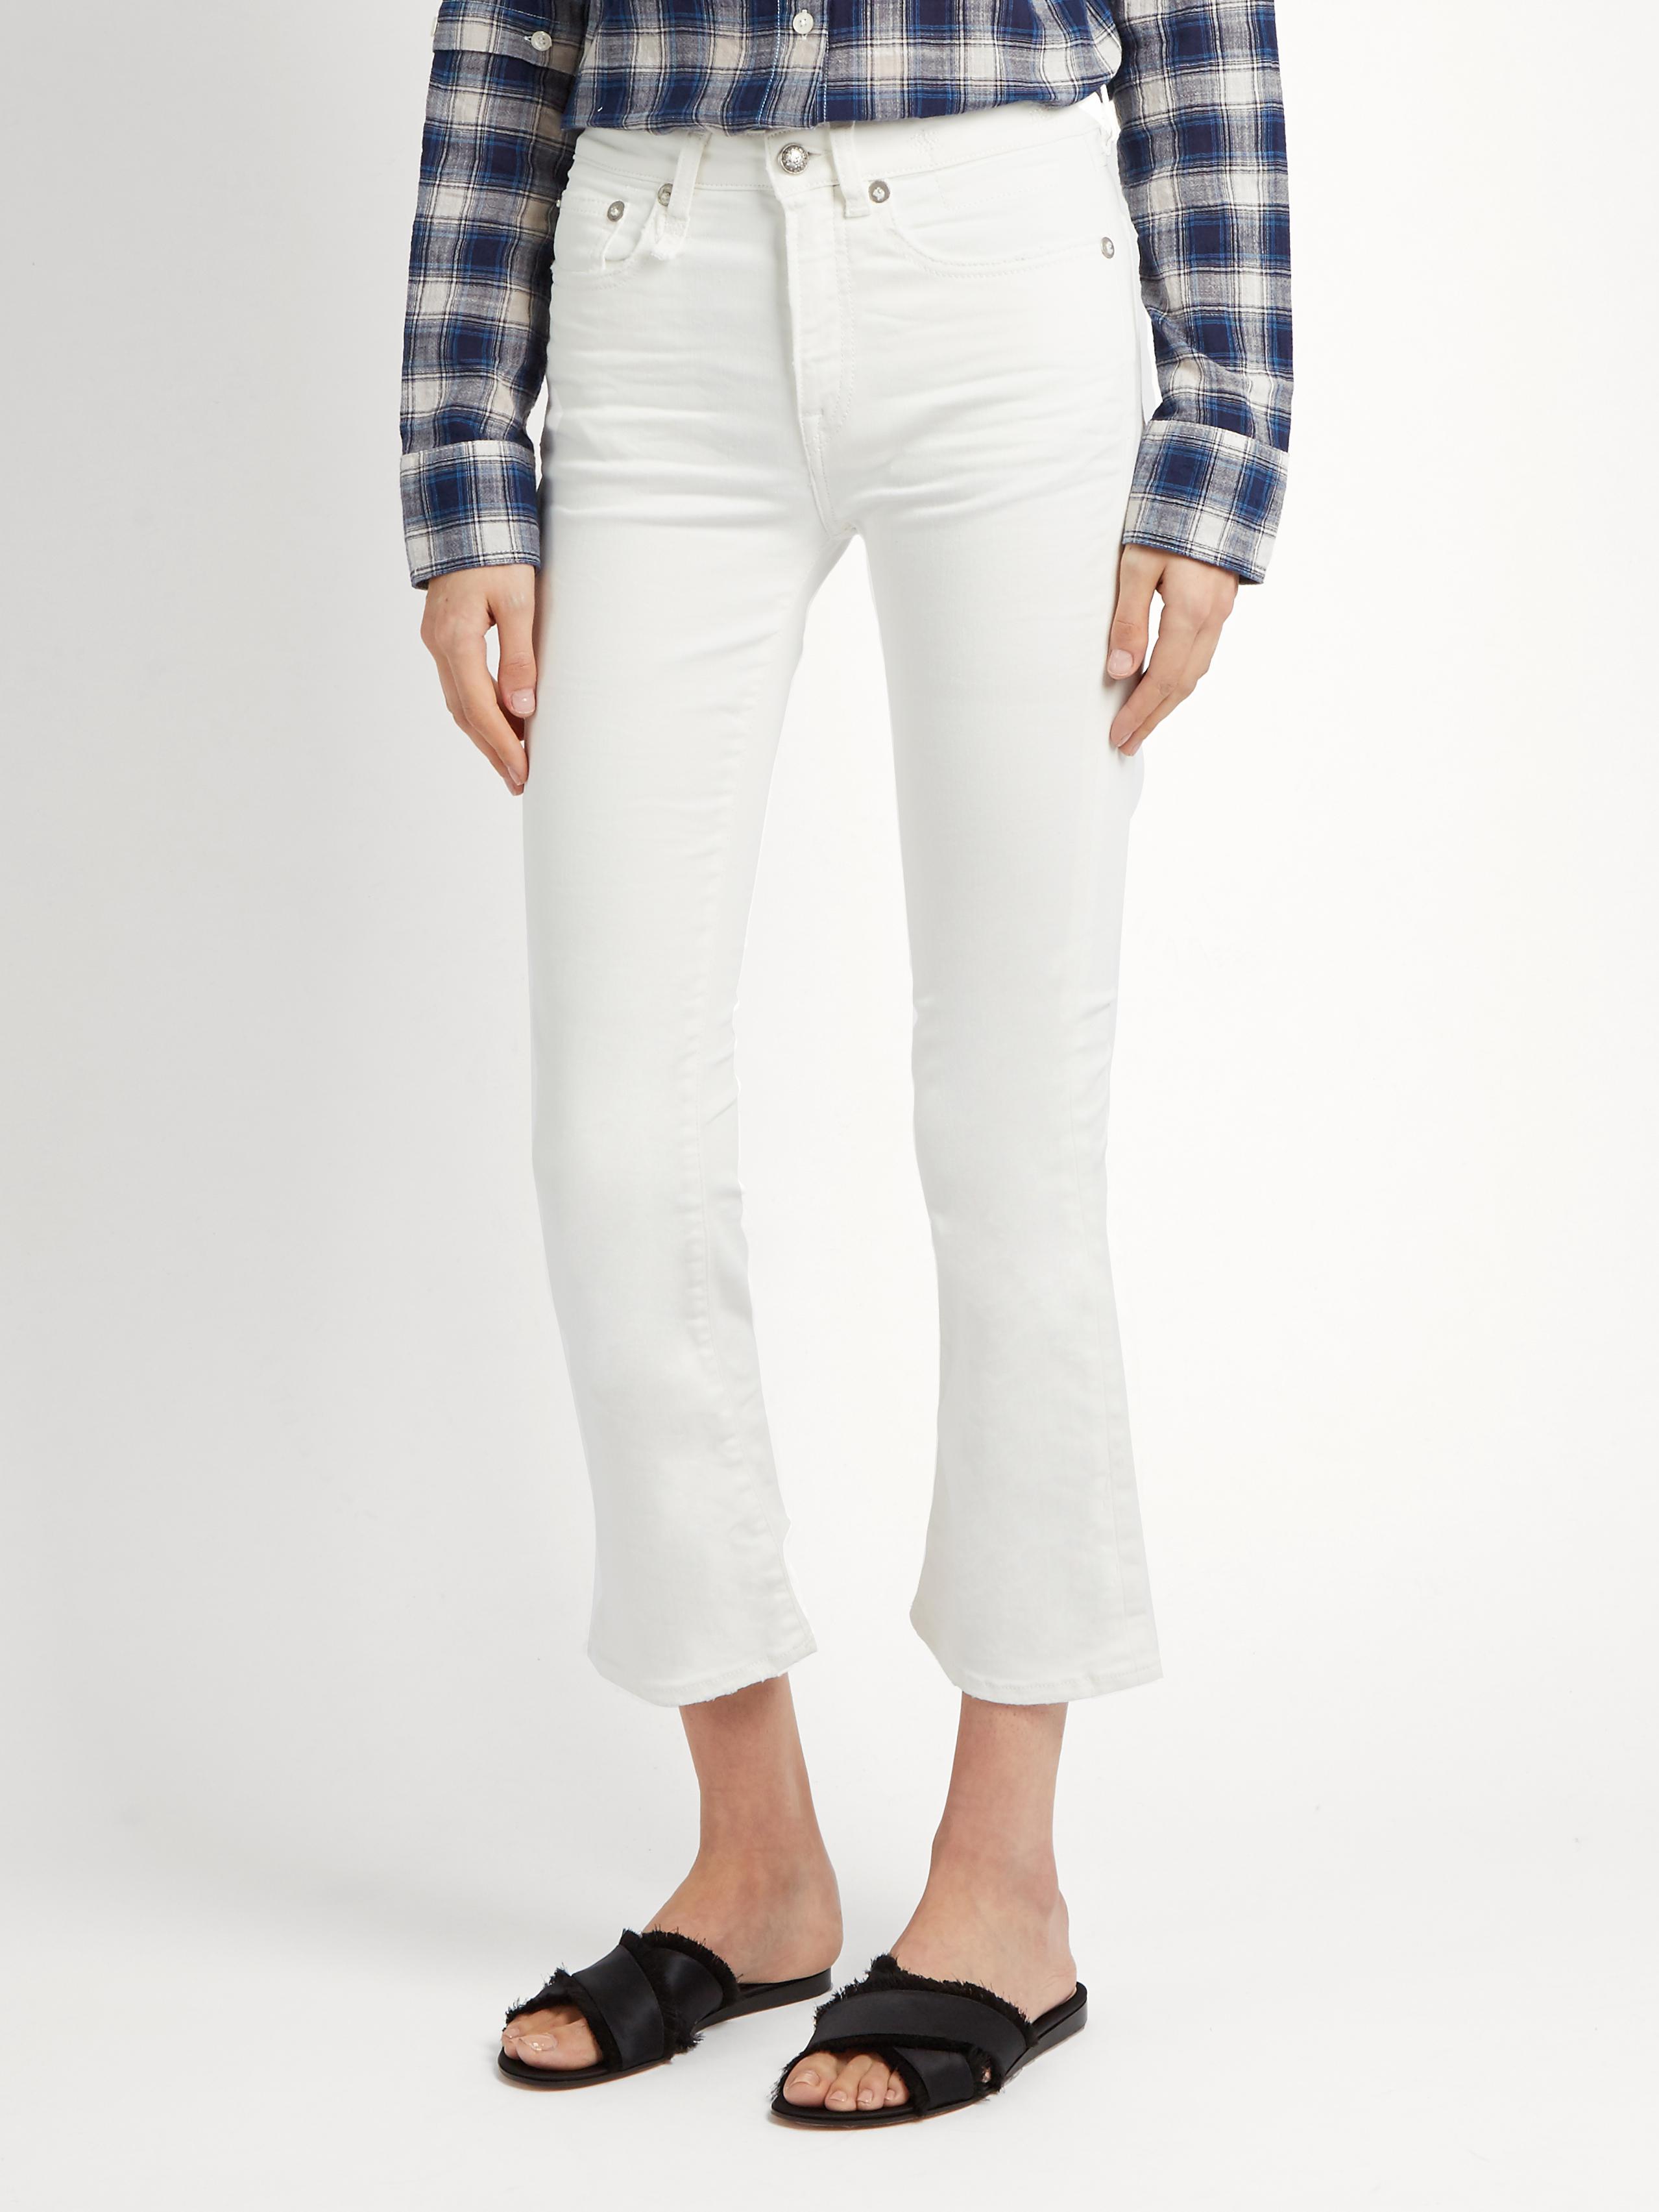 R13 Denim Kick-flare Cropped Jeans in White - Lyst